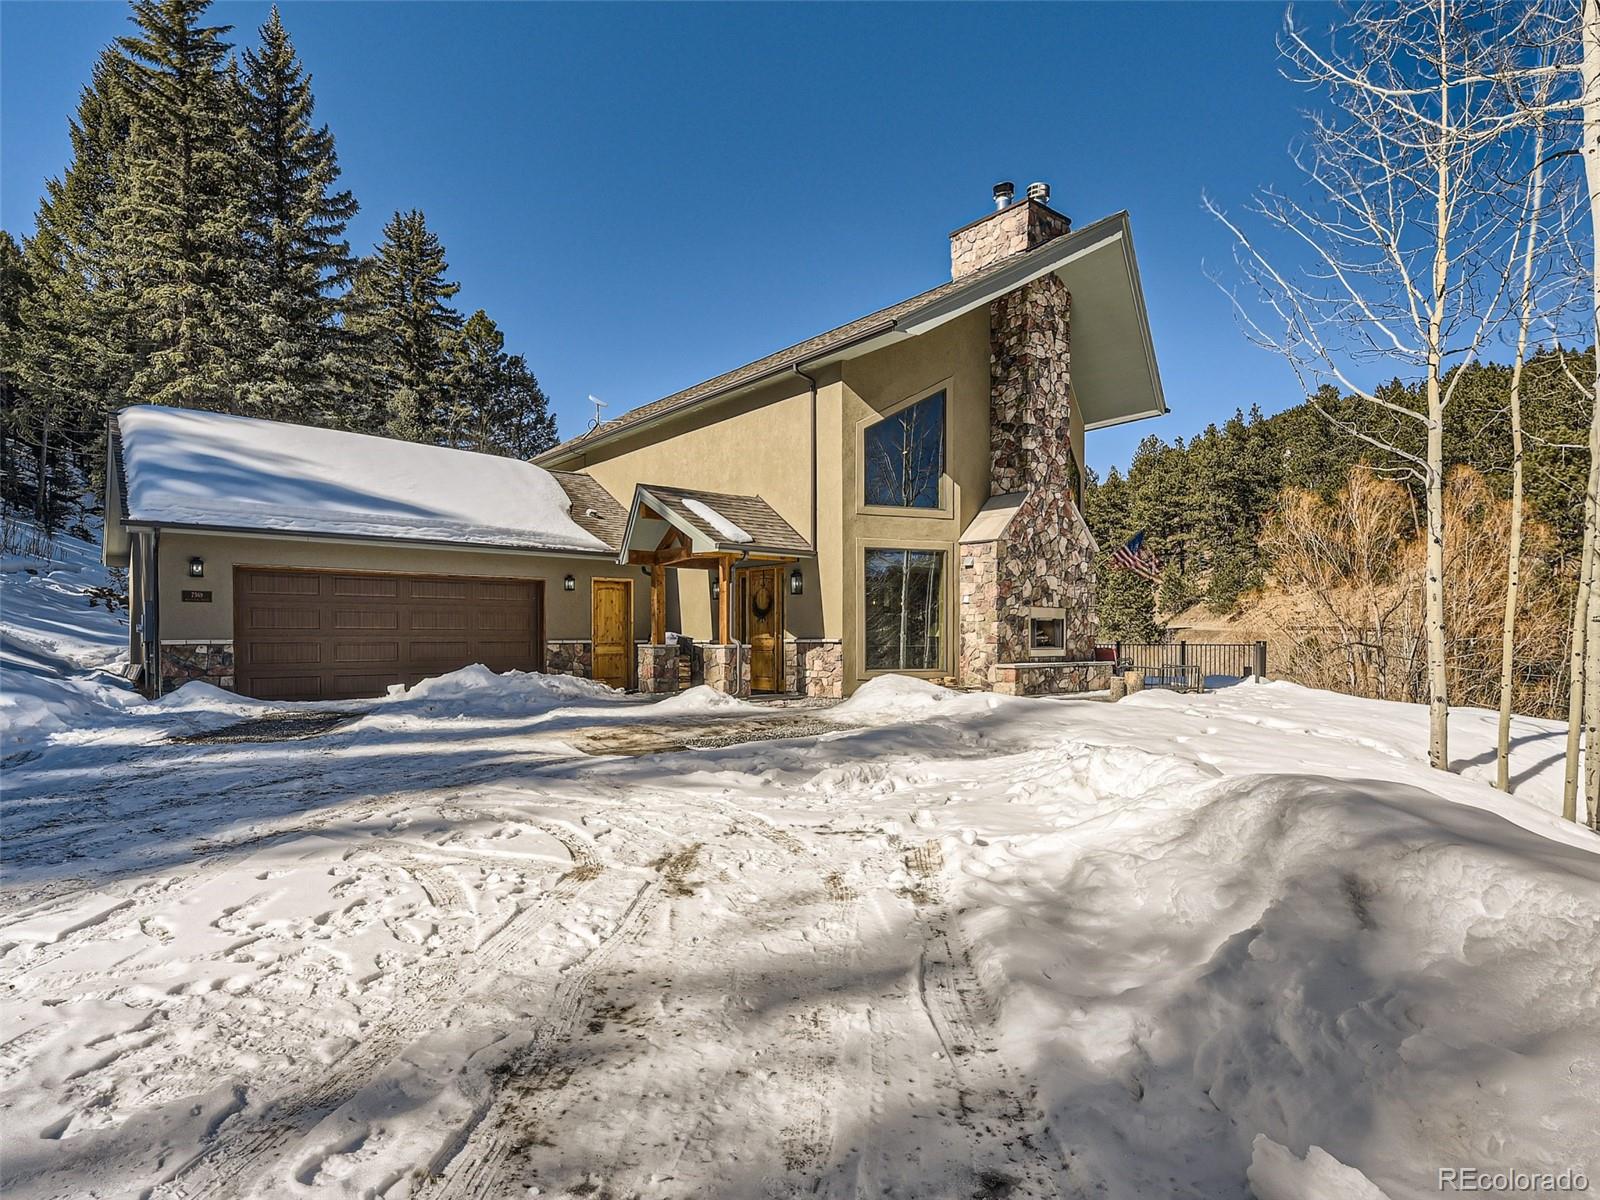 7569  Whispering Brook Trail, evergreen MLS: 3022756 Beds: 3 Baths: 3 Price: $1,250,000